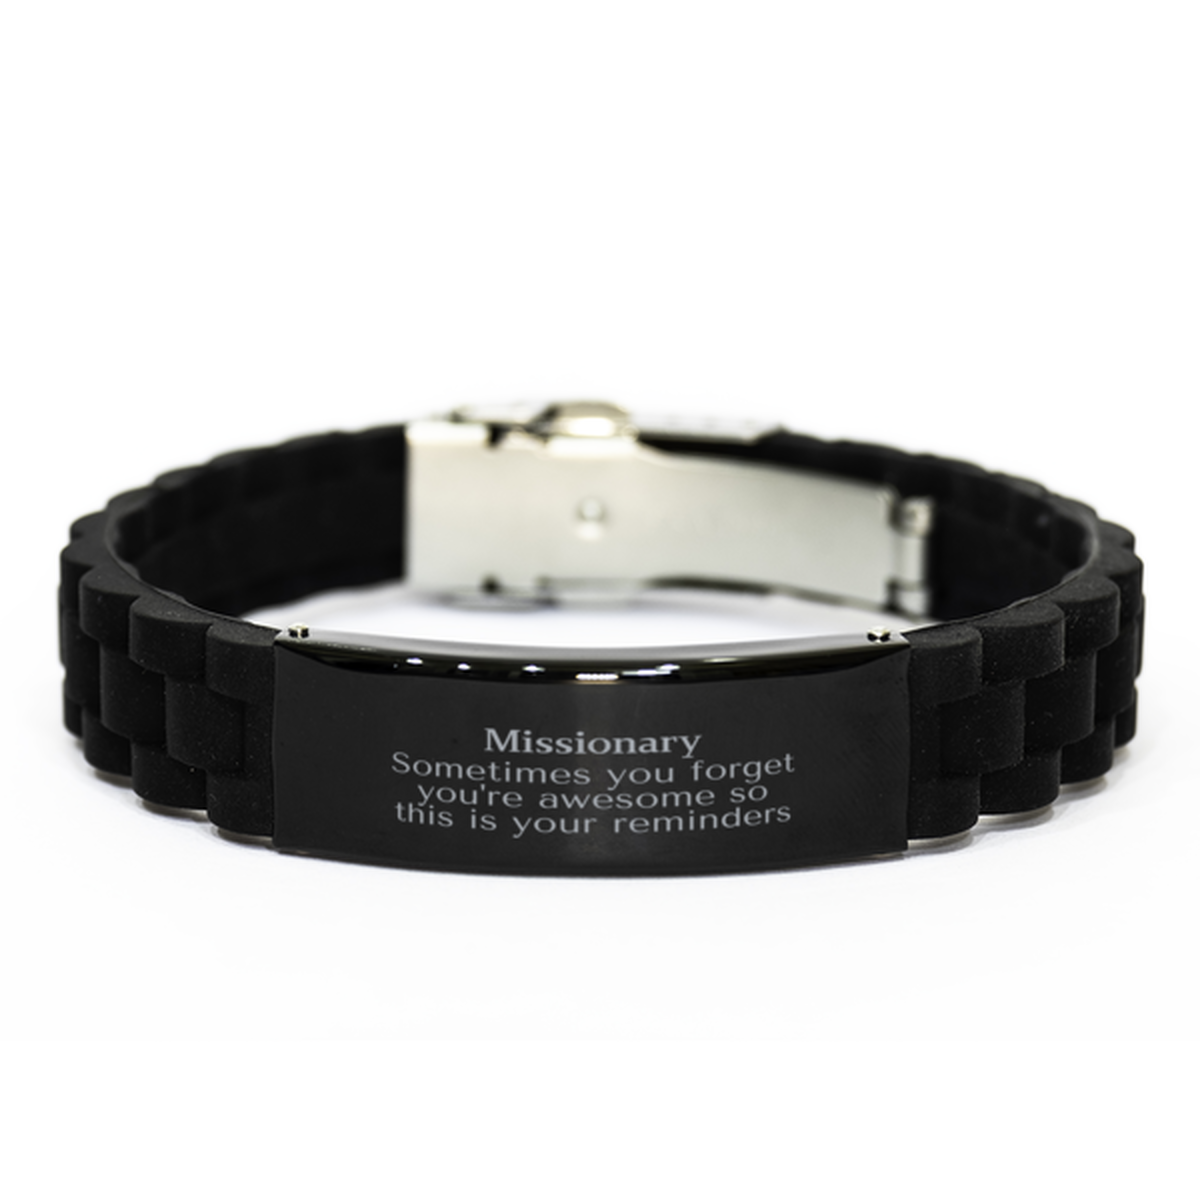 Sentimental Missionary Black Glidelock Clasp Bracelet, Missionary Sometimes you forget you're awesome so this is your reminders, Graduation Christmas Birthday Gifts for Missionary, Men, Women, Coworkers